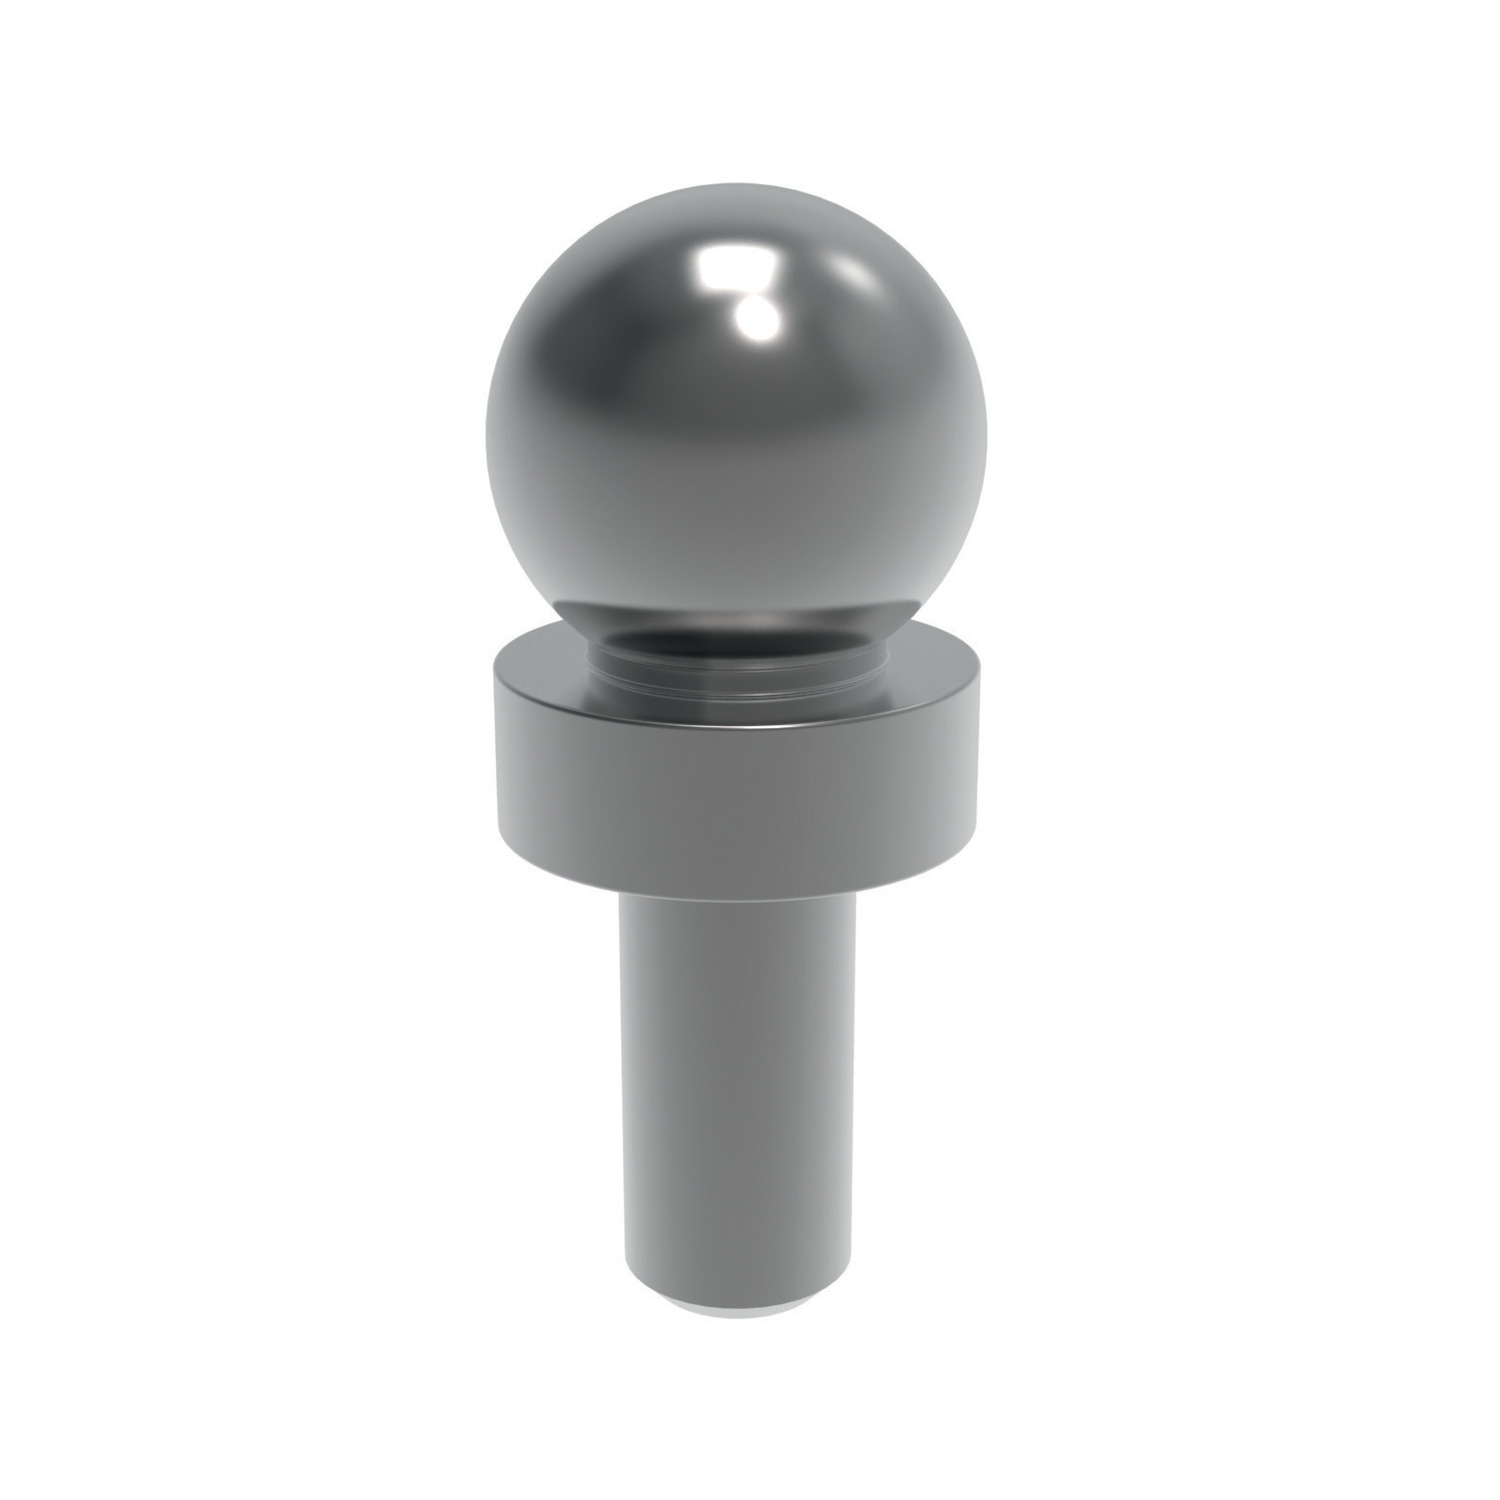 Tooling Balls - Imperial Imperial tooling balls with slip-fit and one piece construction design. Made from hardened and ground steel.